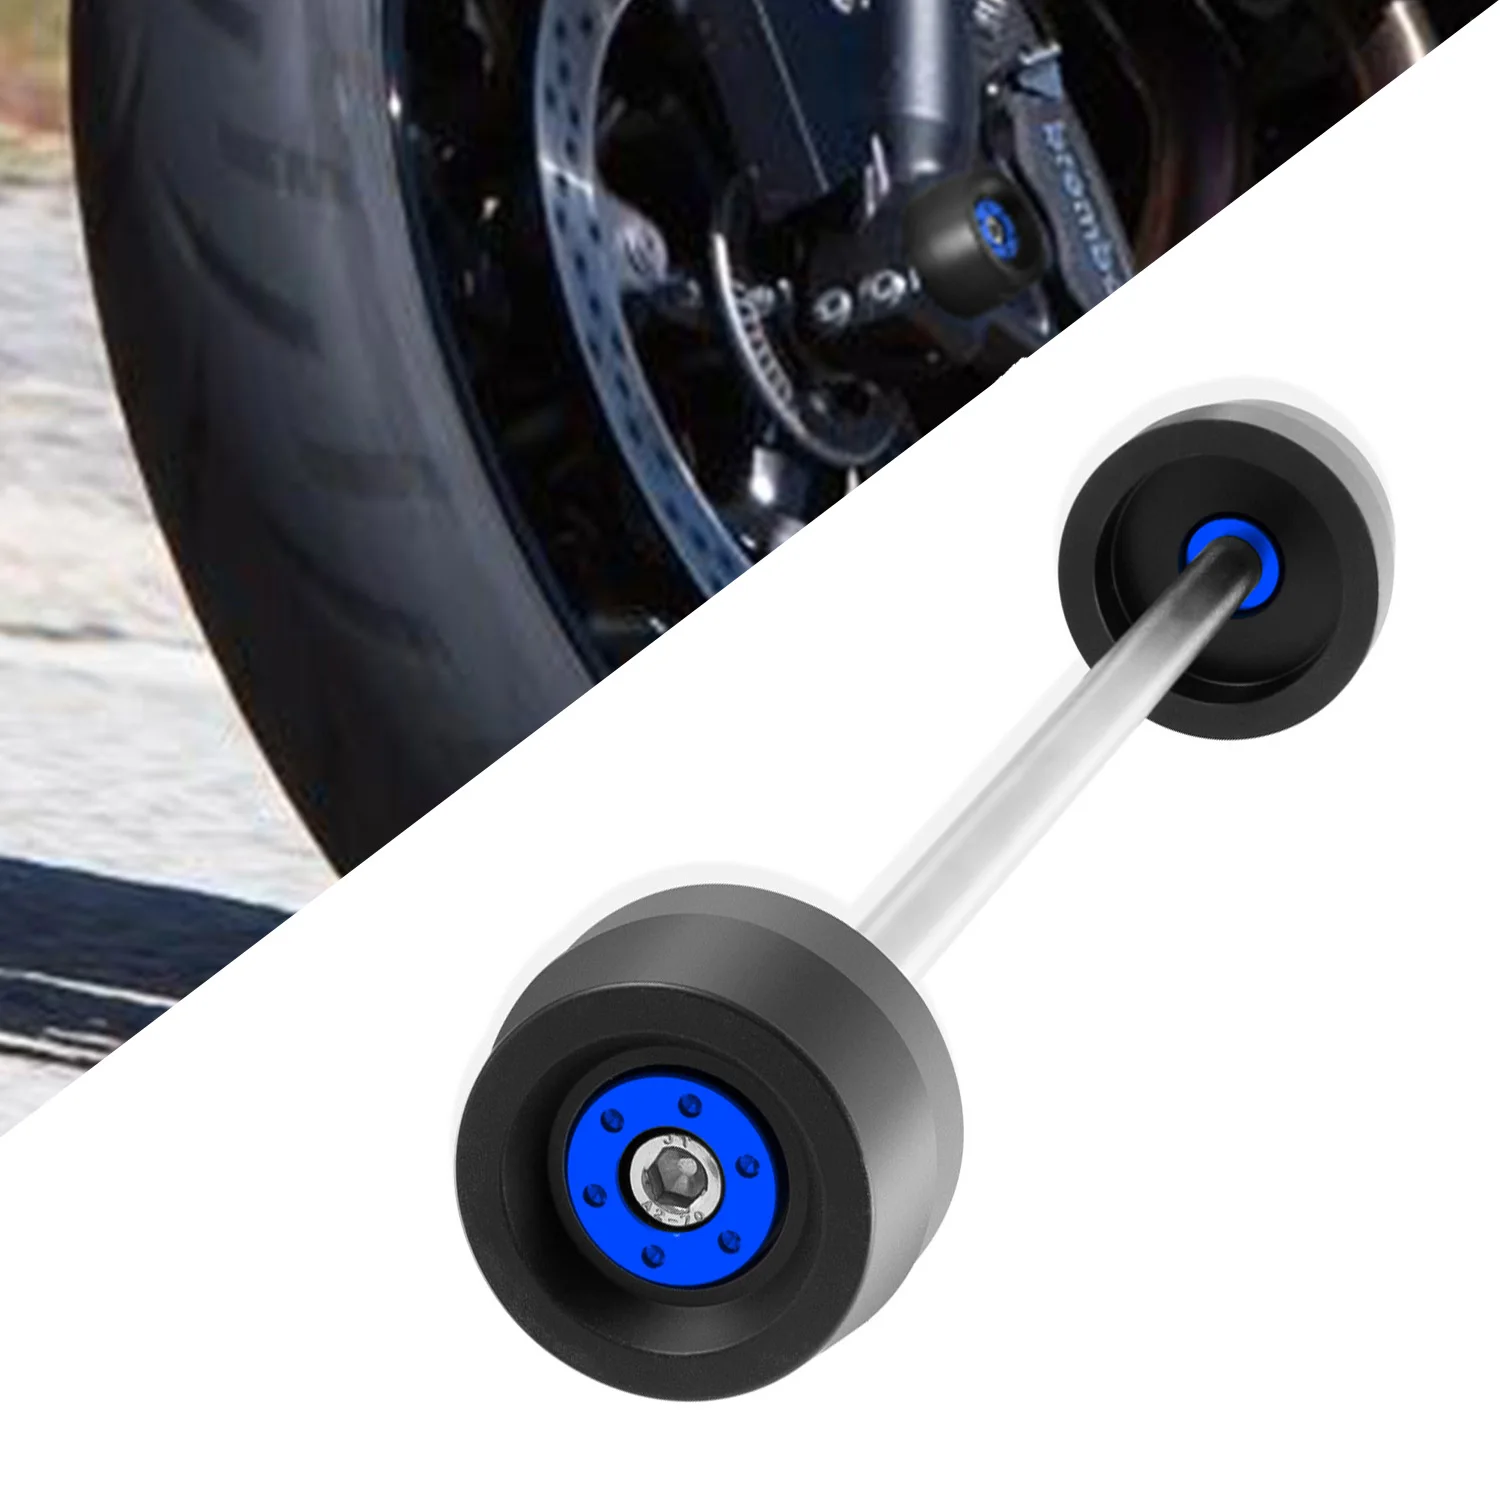 Motorcycle Front Axle Slider Wheel Protection For Yamaha MT-07 MT07 FZ-07 FZ07 XSR700 XSR 700 2014-2017 enlarge